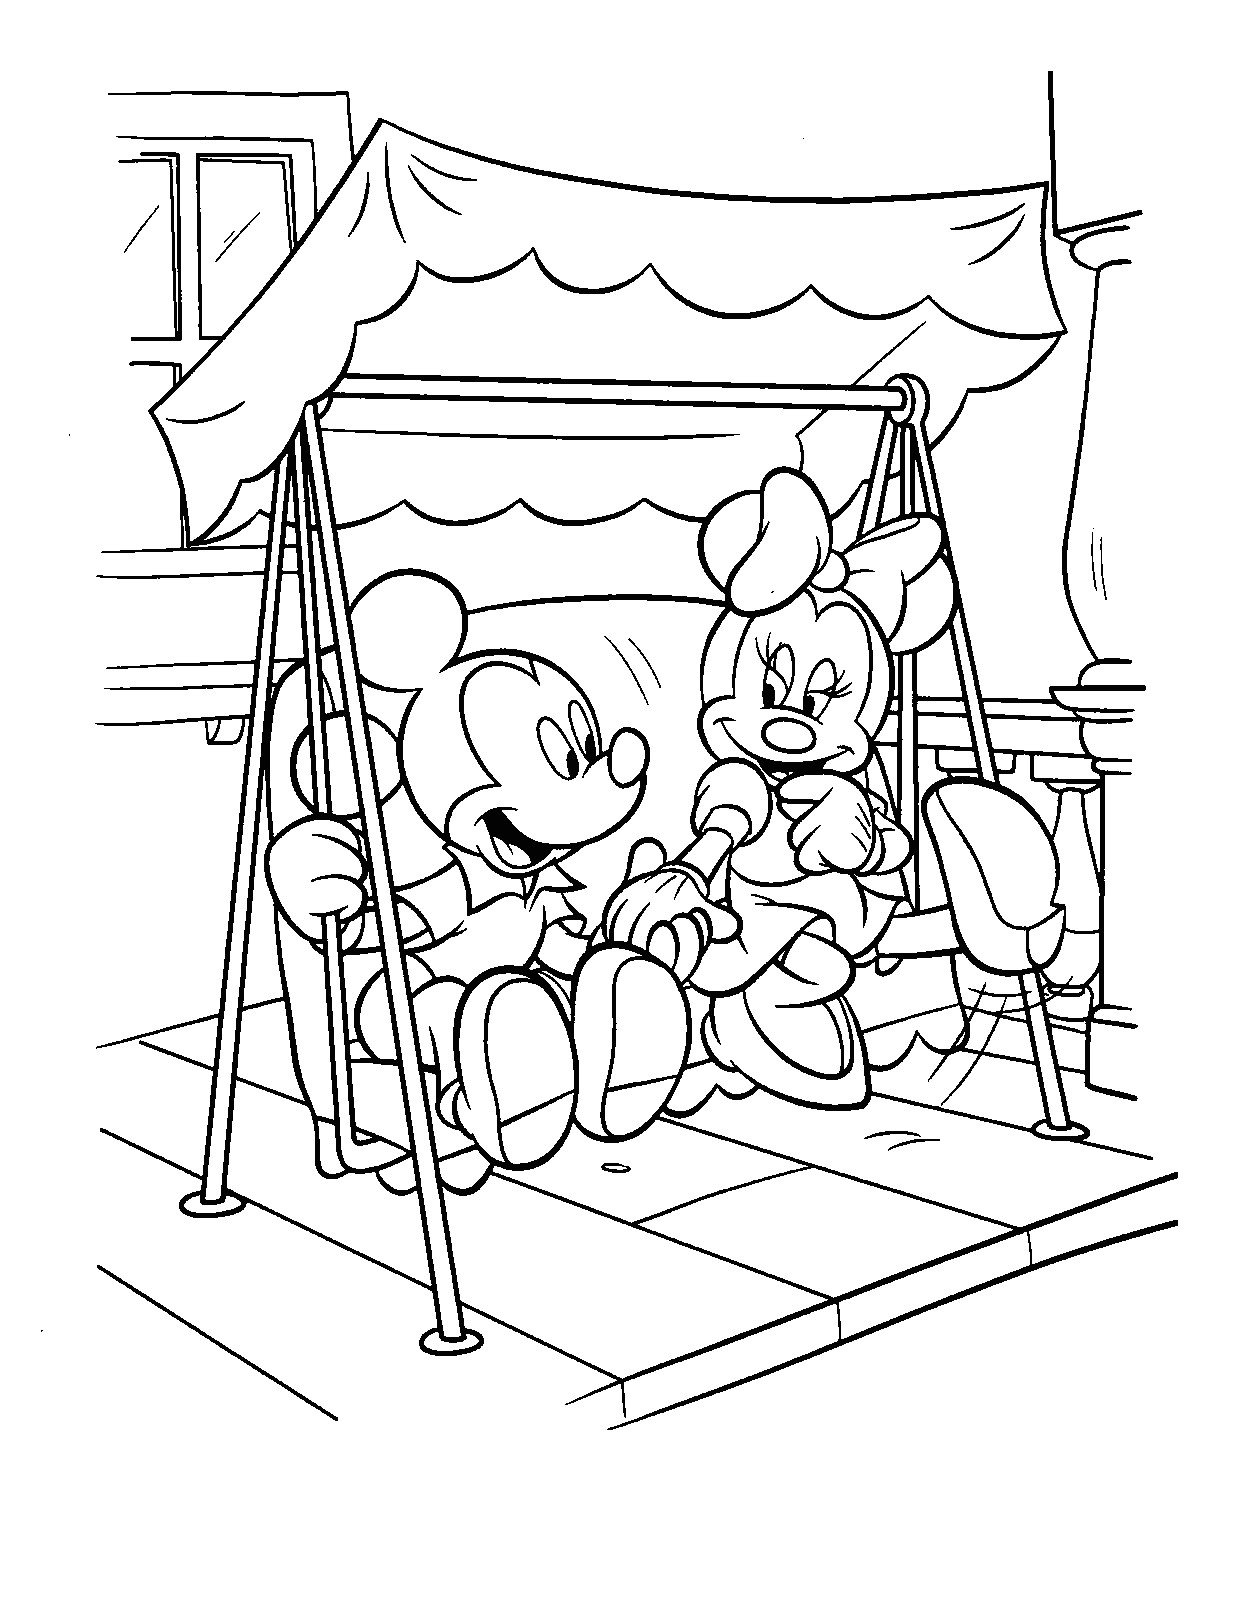 Mickey And Minnie Mouse Coloring Pages
 Free Printable Minnie Mouse Coloring Pages For Kids